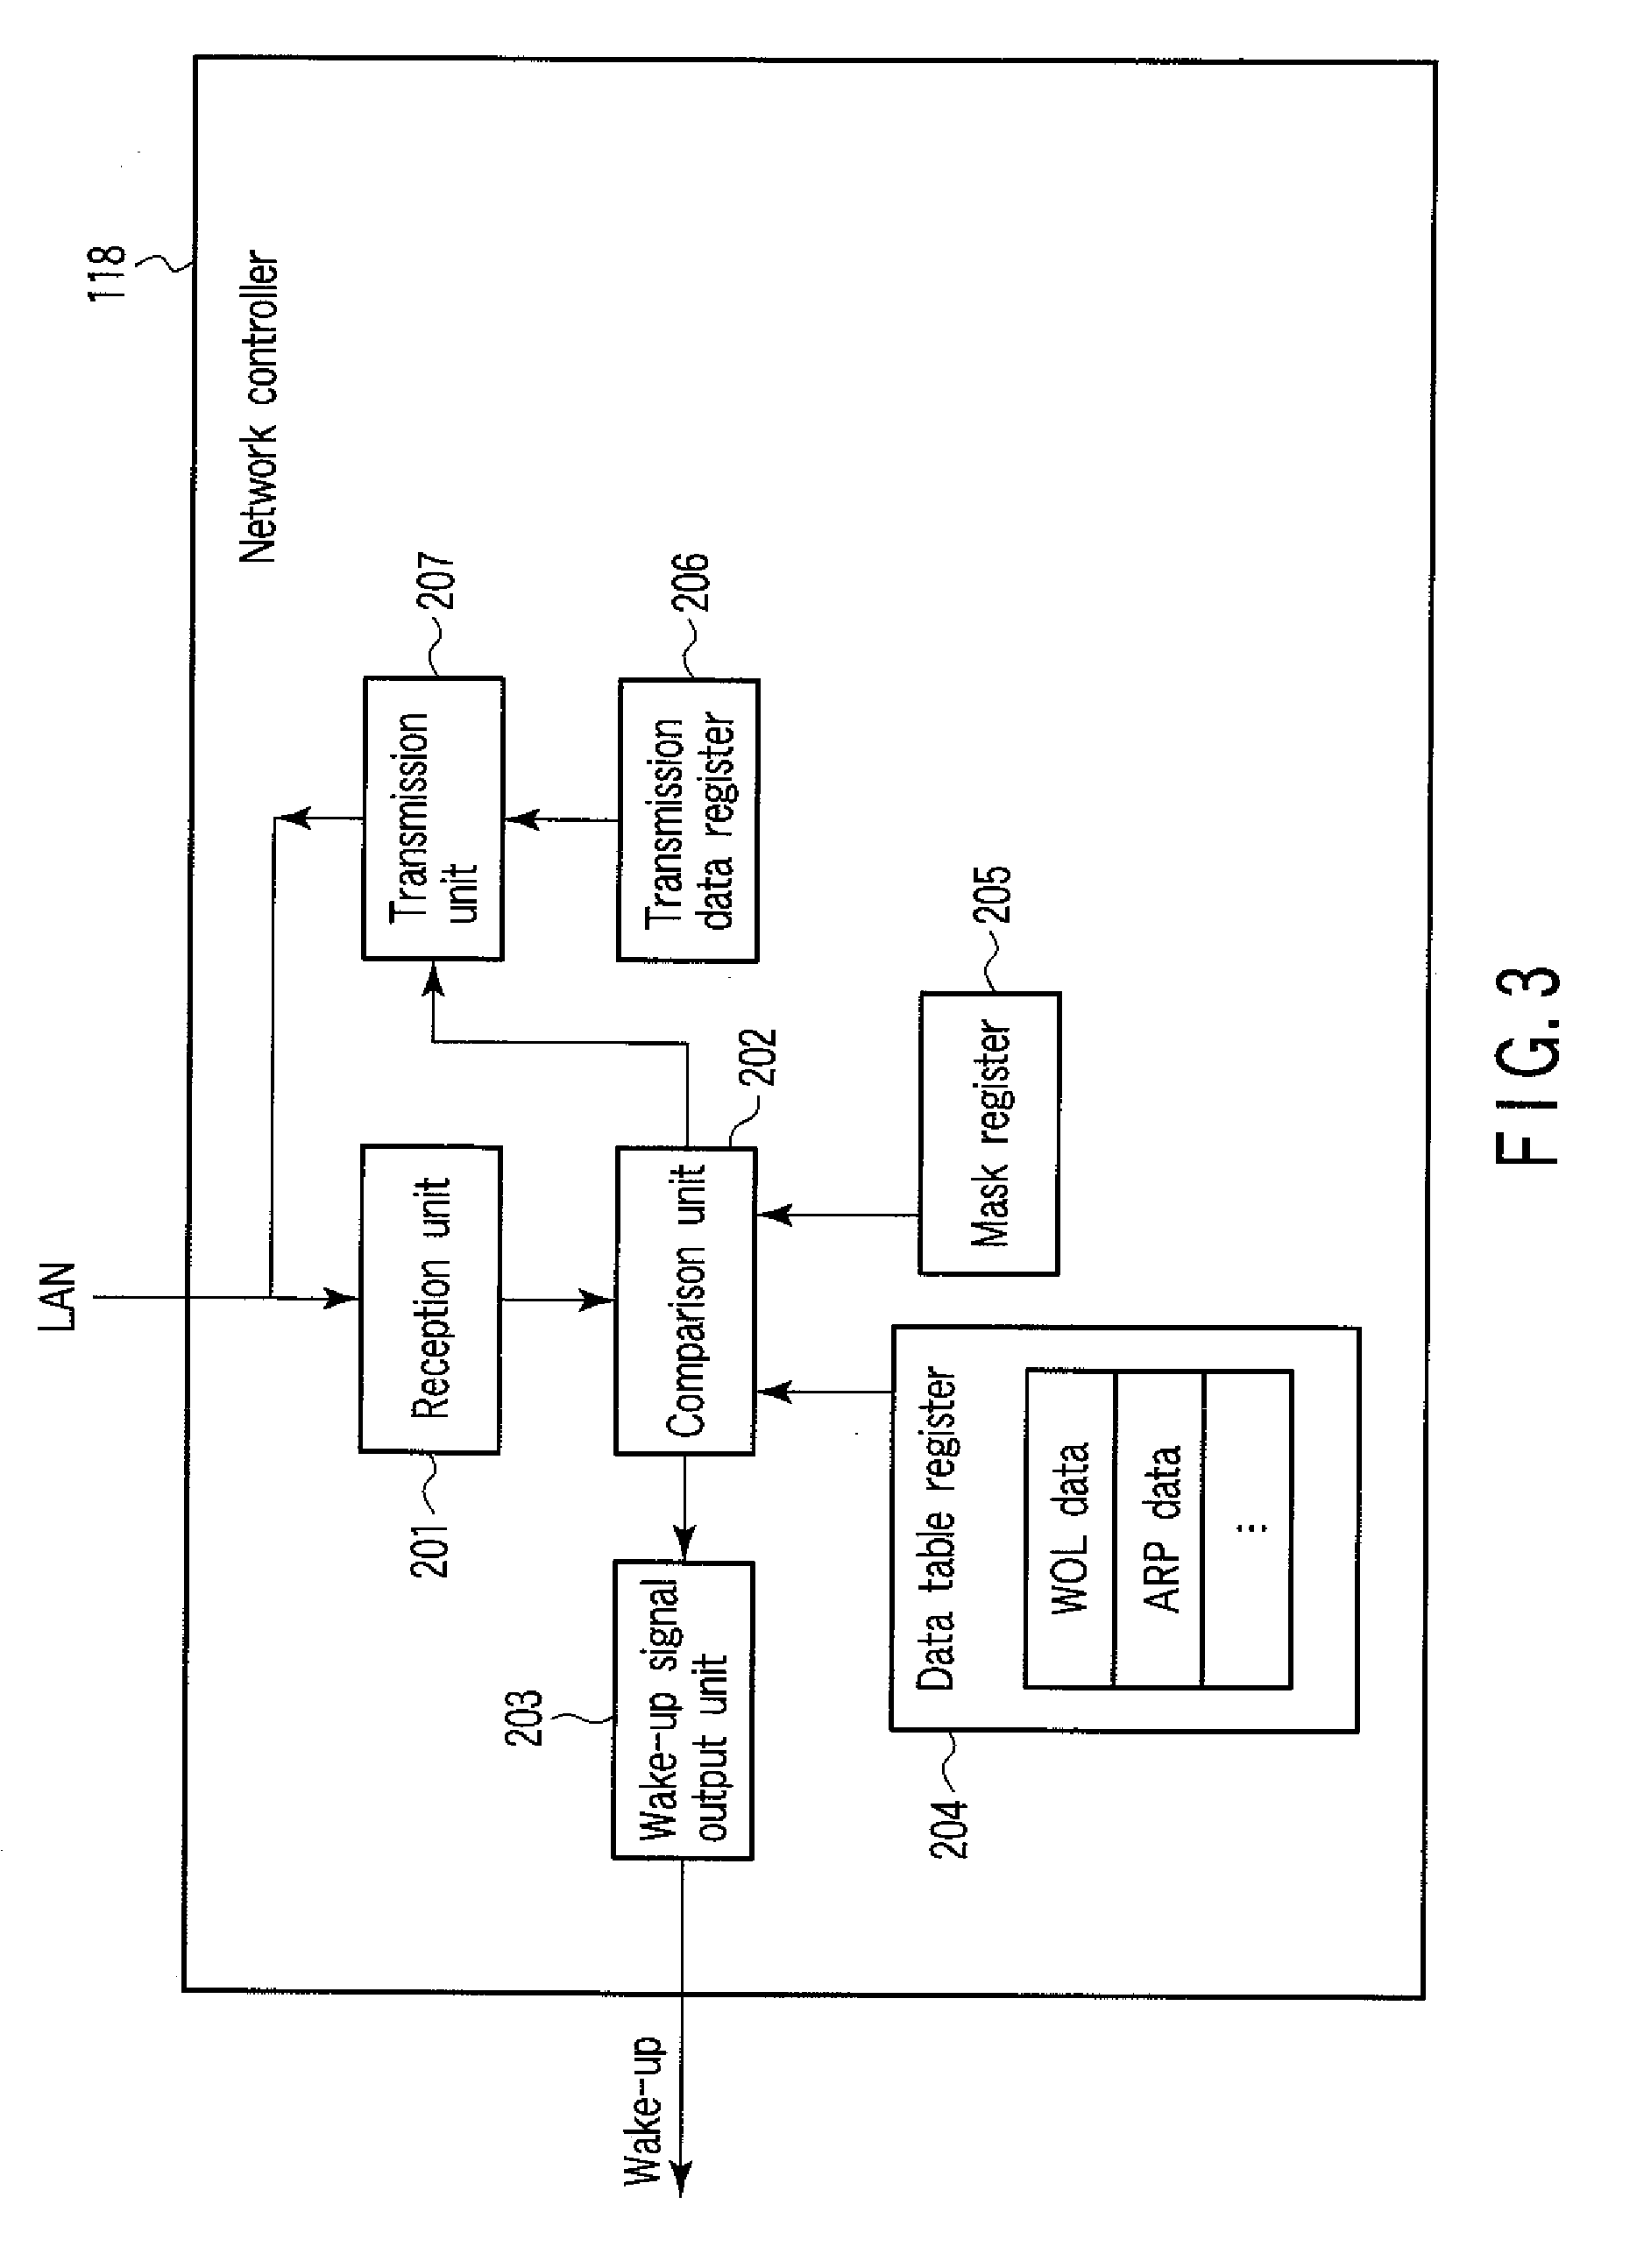 Network controller, information processing apparatus and wake-up control method